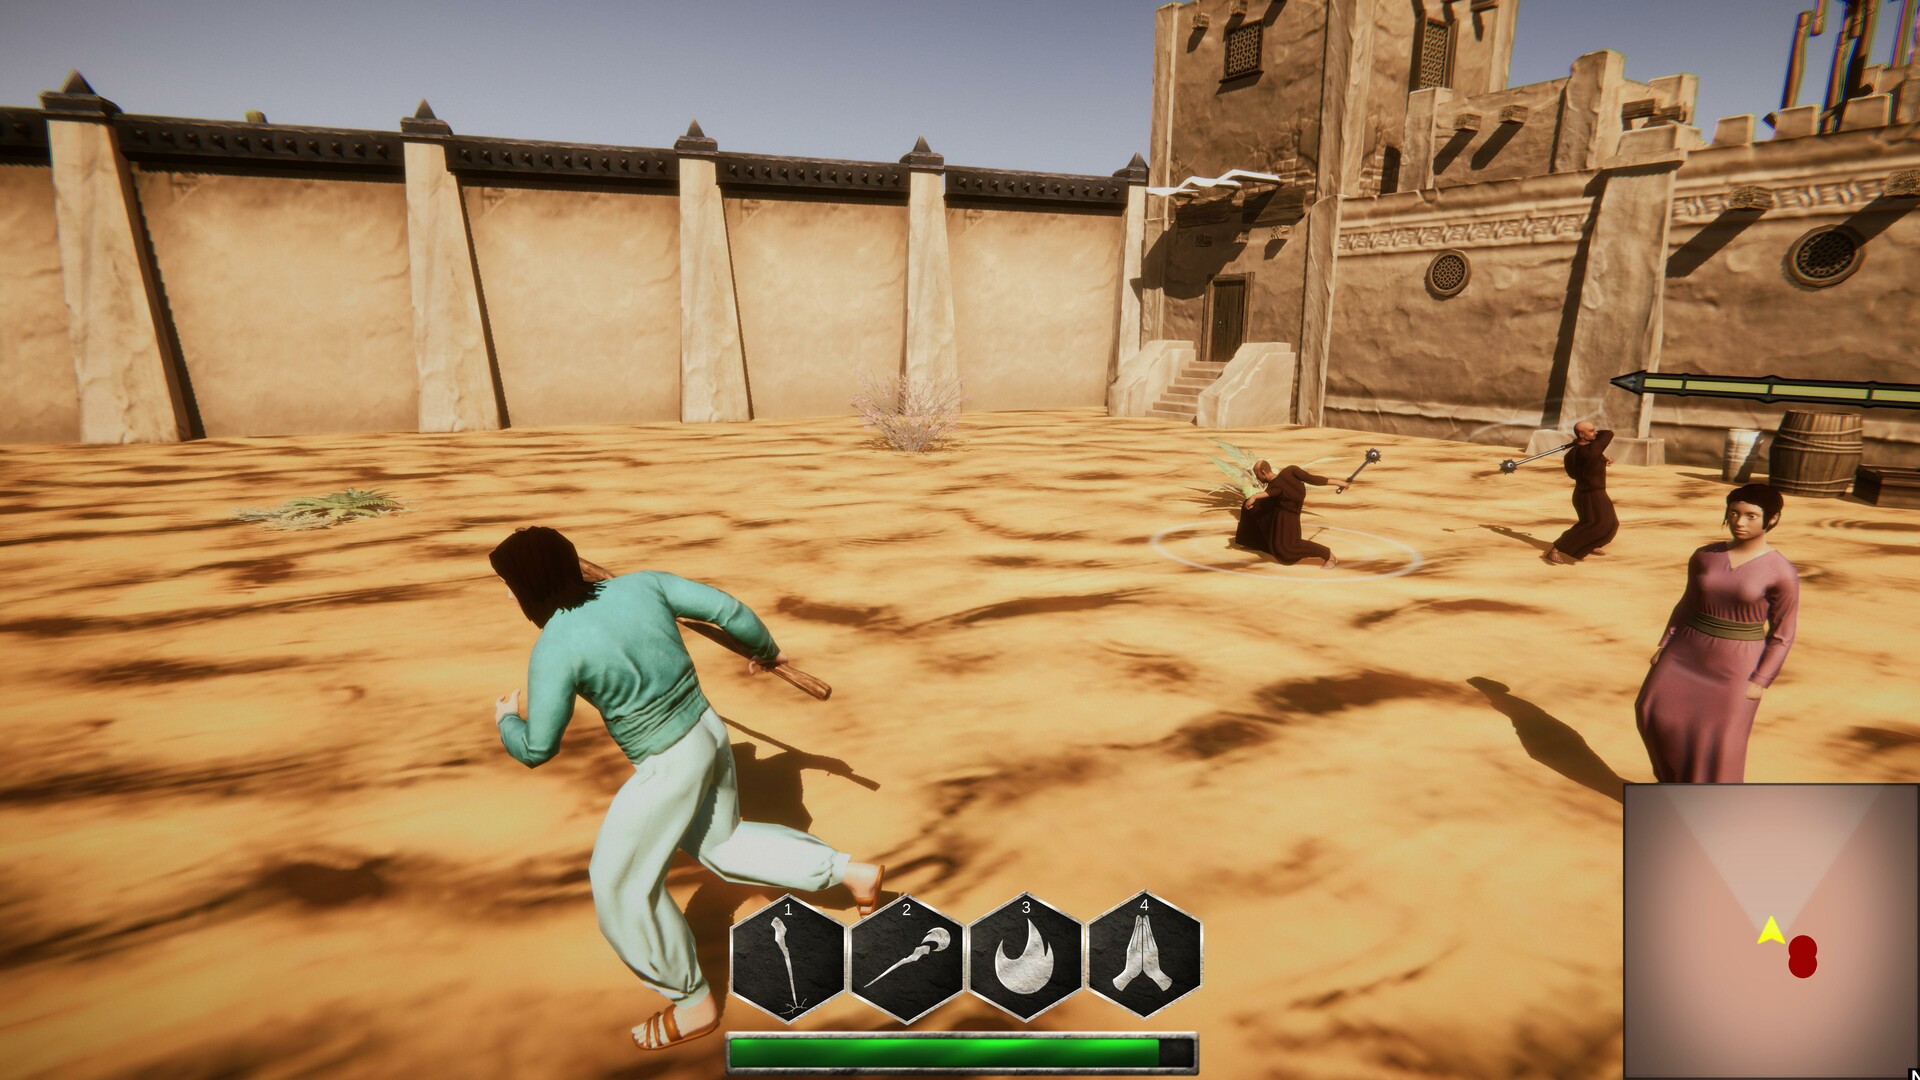 Adventures of the Old Testament - The Bible Video Game Free Download